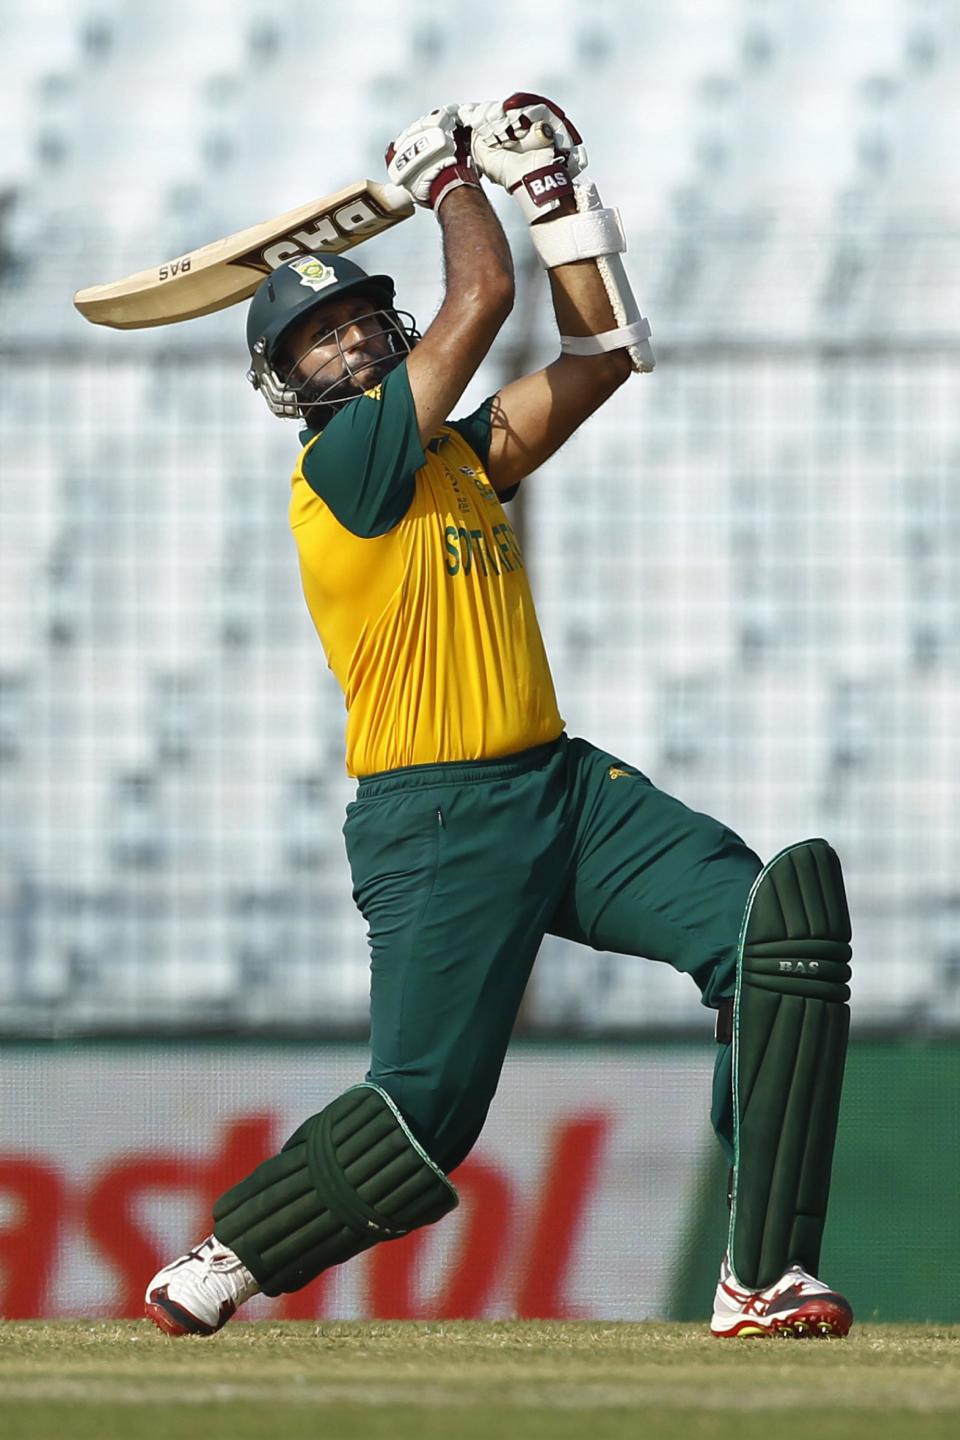 South Africa's Hashim Amla plays a shot during their ICC Twenty20 Cricket World Cup match against New Zealand, in Chittagong, Bangladesh, Monday, March 24, 2014. (AP Photo/A.M. Ahad)